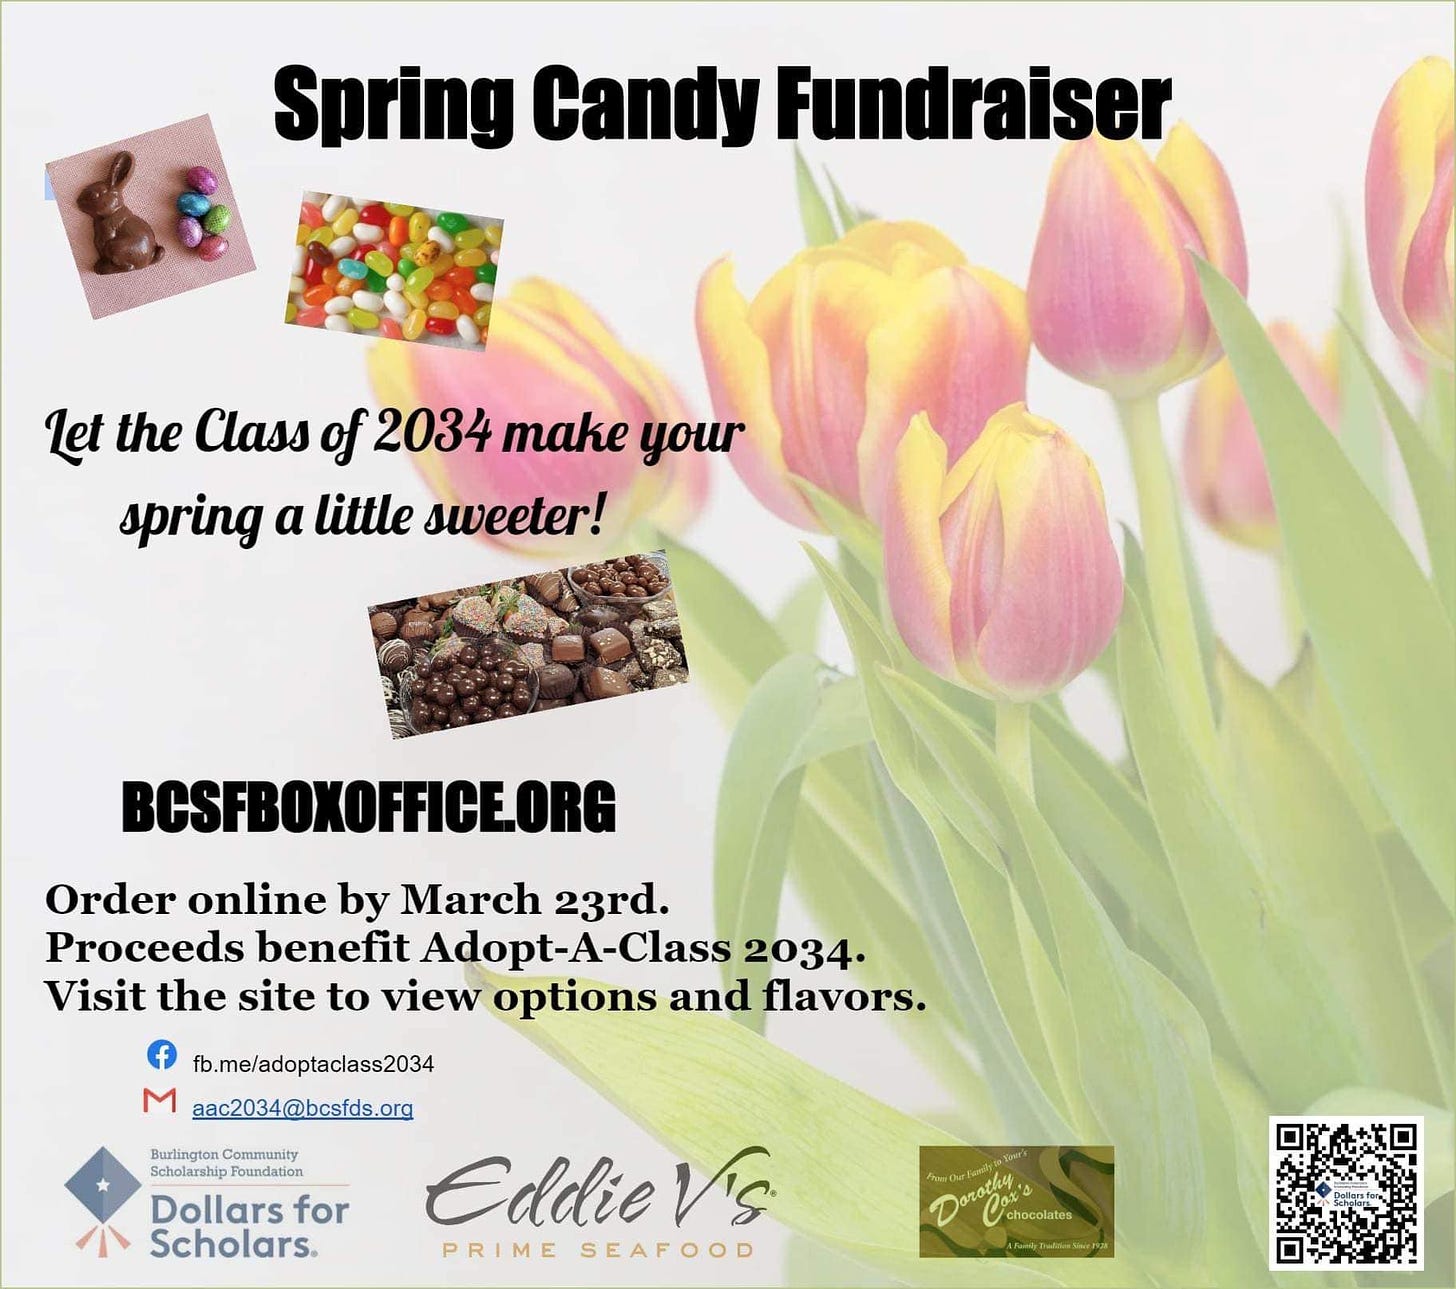 May be an image of text that says 'Spring Candy Fundraiser Let the Class of 2034 make your spring a little sweeter! BCSFBOXOFFICE.ORG Order online by March 23rd. Proceeds benefit Adopt-A Adopt-A-Class 2034・ Visit the site to view options and flavors. f fb.me/adoptaclass2034 M aac2034@bcsfds.org Eddiev's PRIME SEAFOOD Scholarship Dollars for Scholars. Uchocolates AFamilyTrudufosSiner1928'